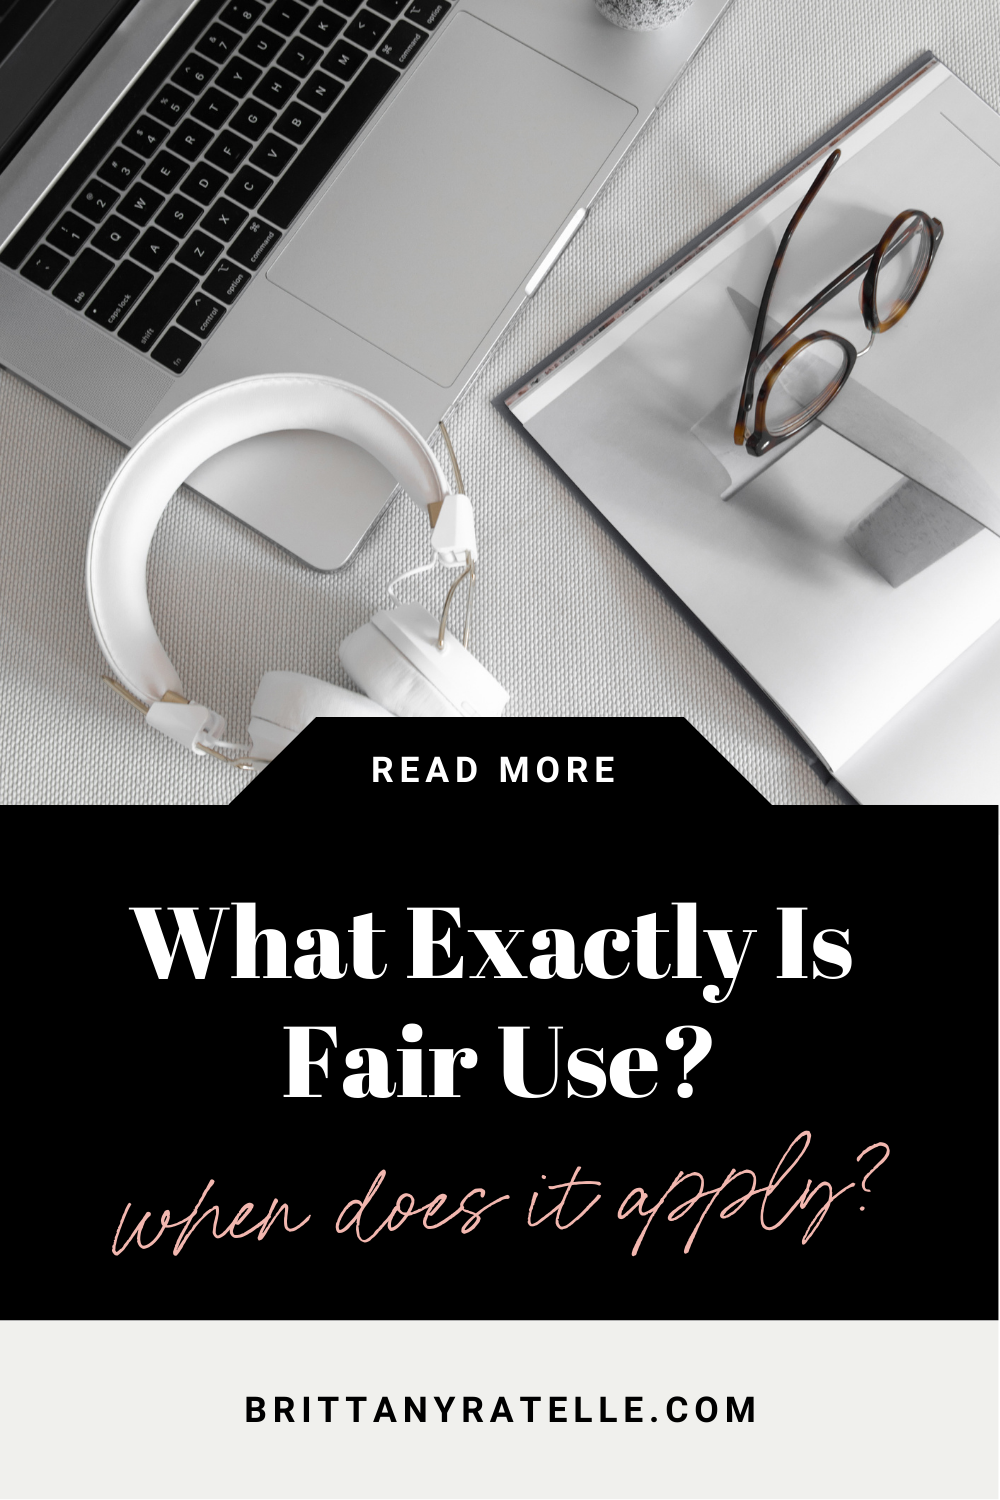 What exactly is fair use? When does it apply?